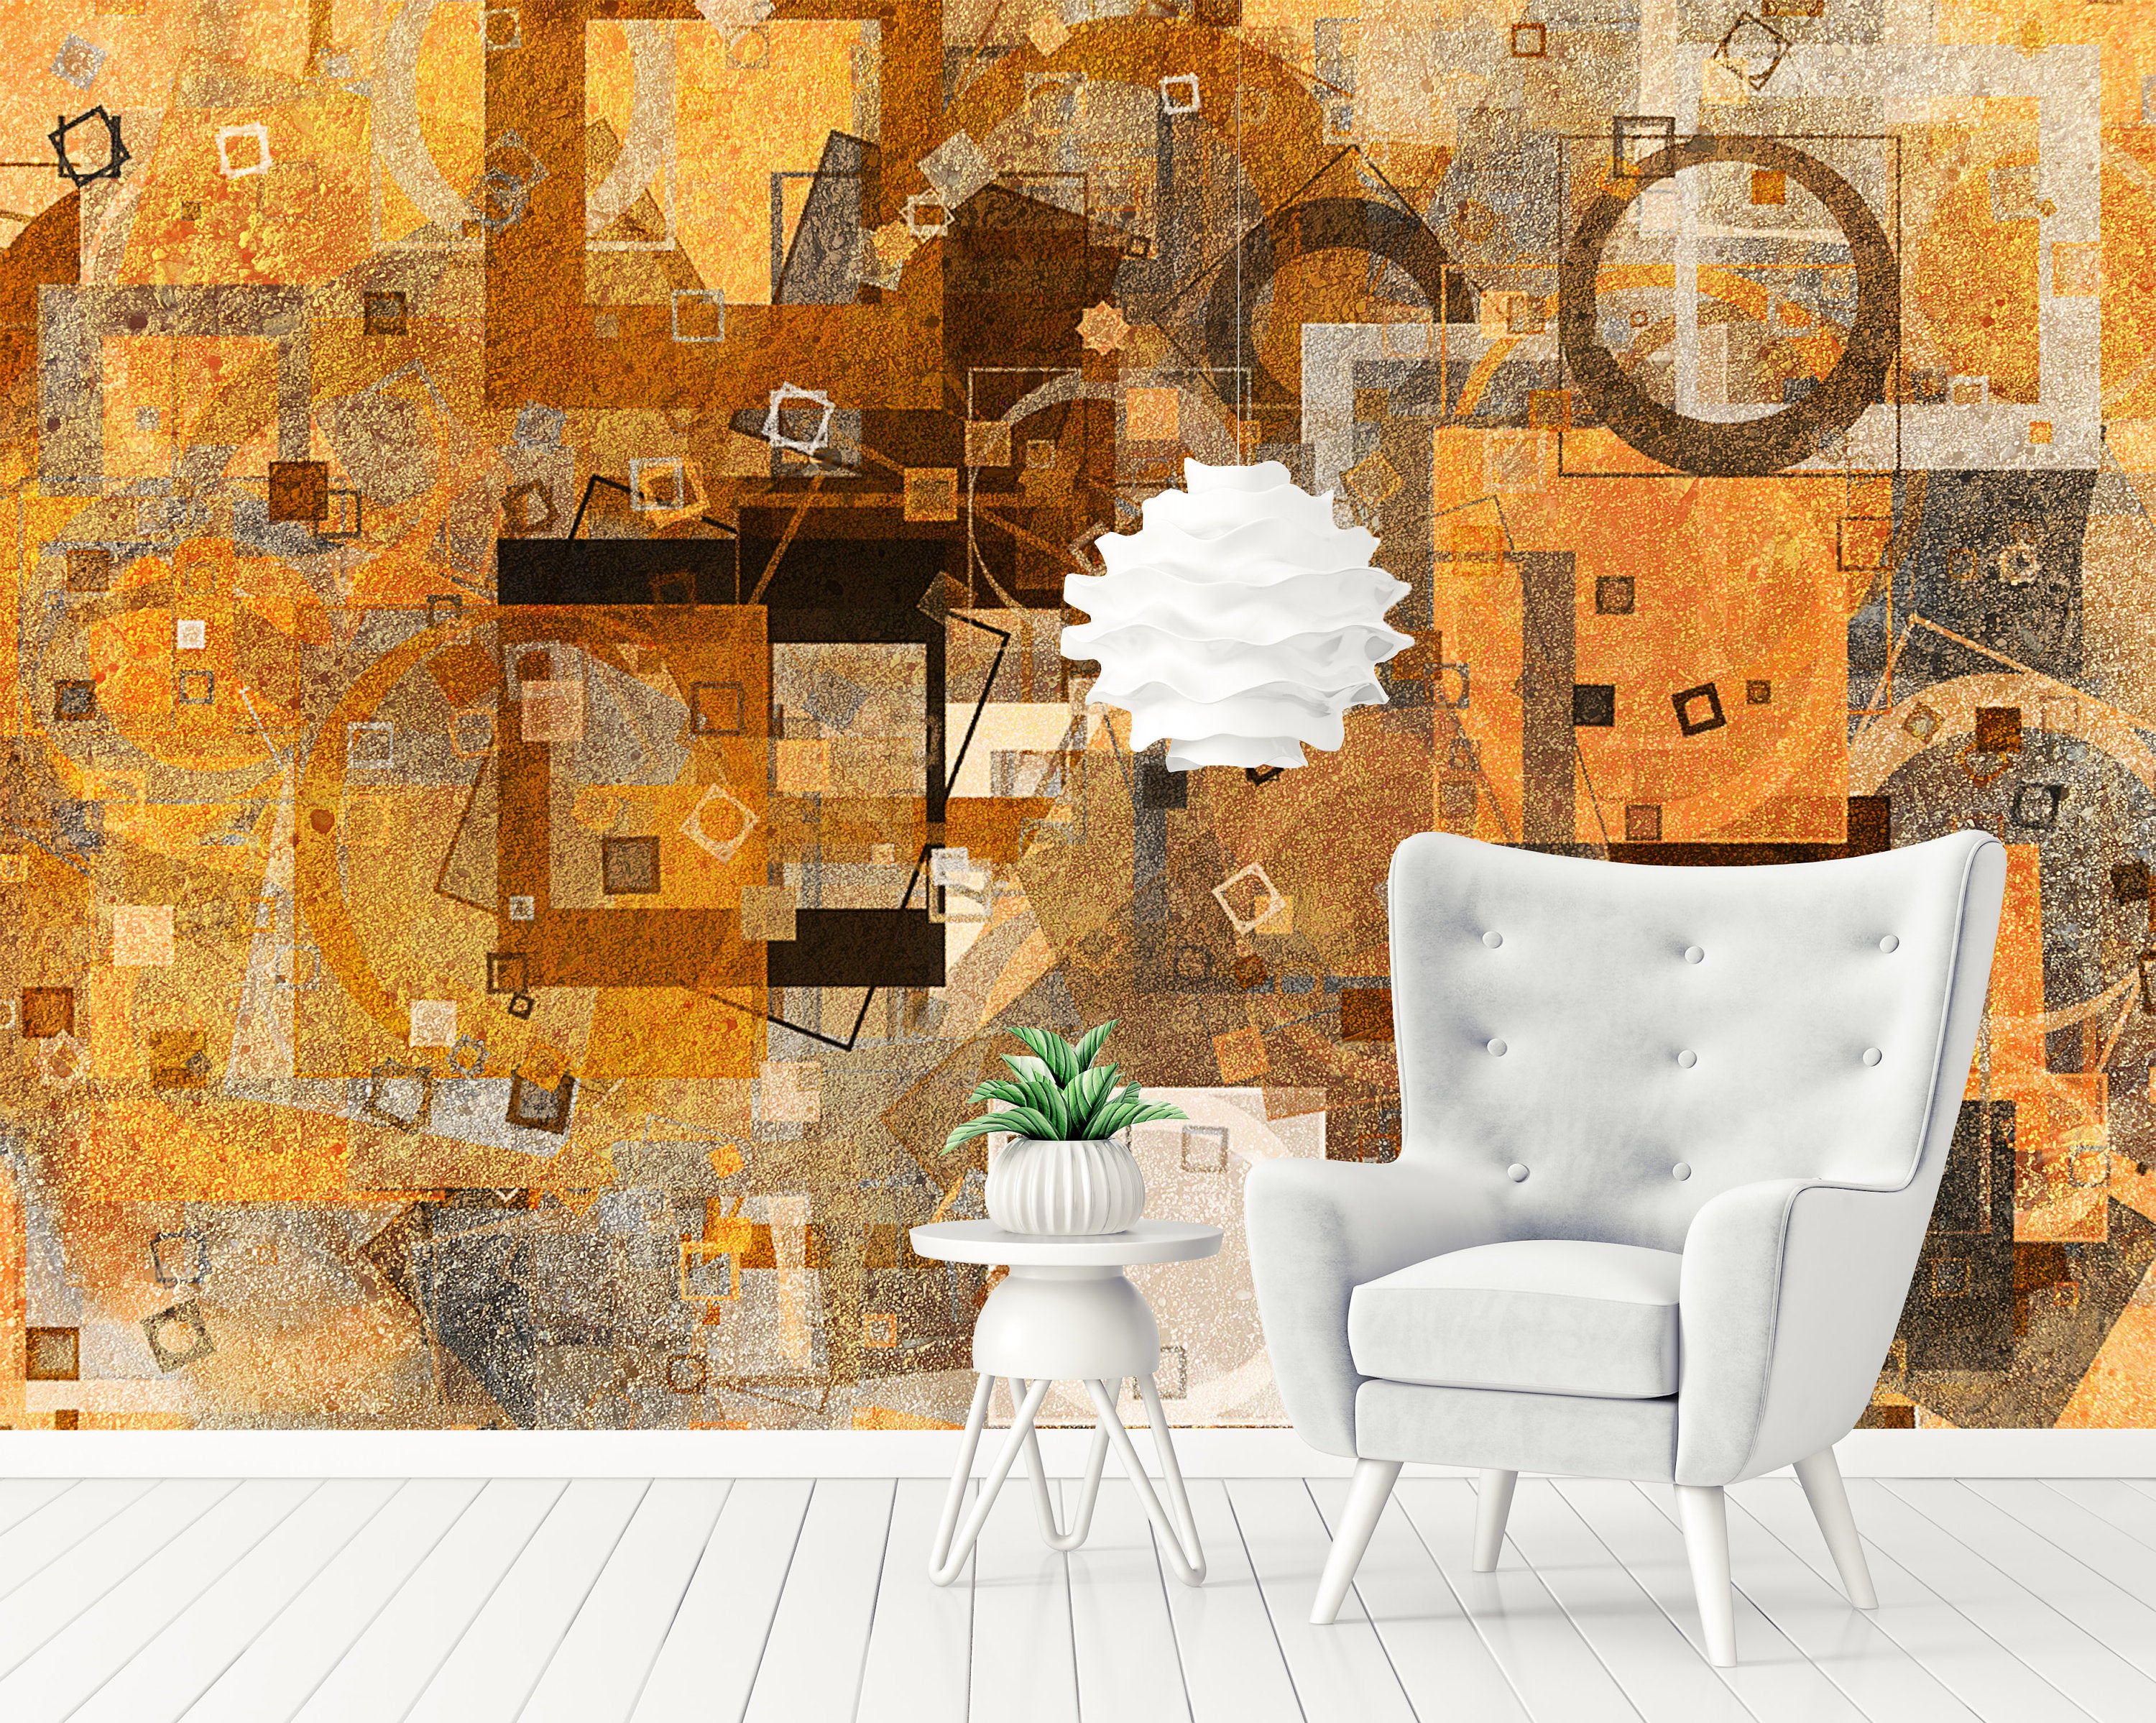 Abstract Grunge Rough Blended Texture Overlay Background Wallpaper Self Adhesive Peel and Stick Wall Sticker Wall Decoration Removable